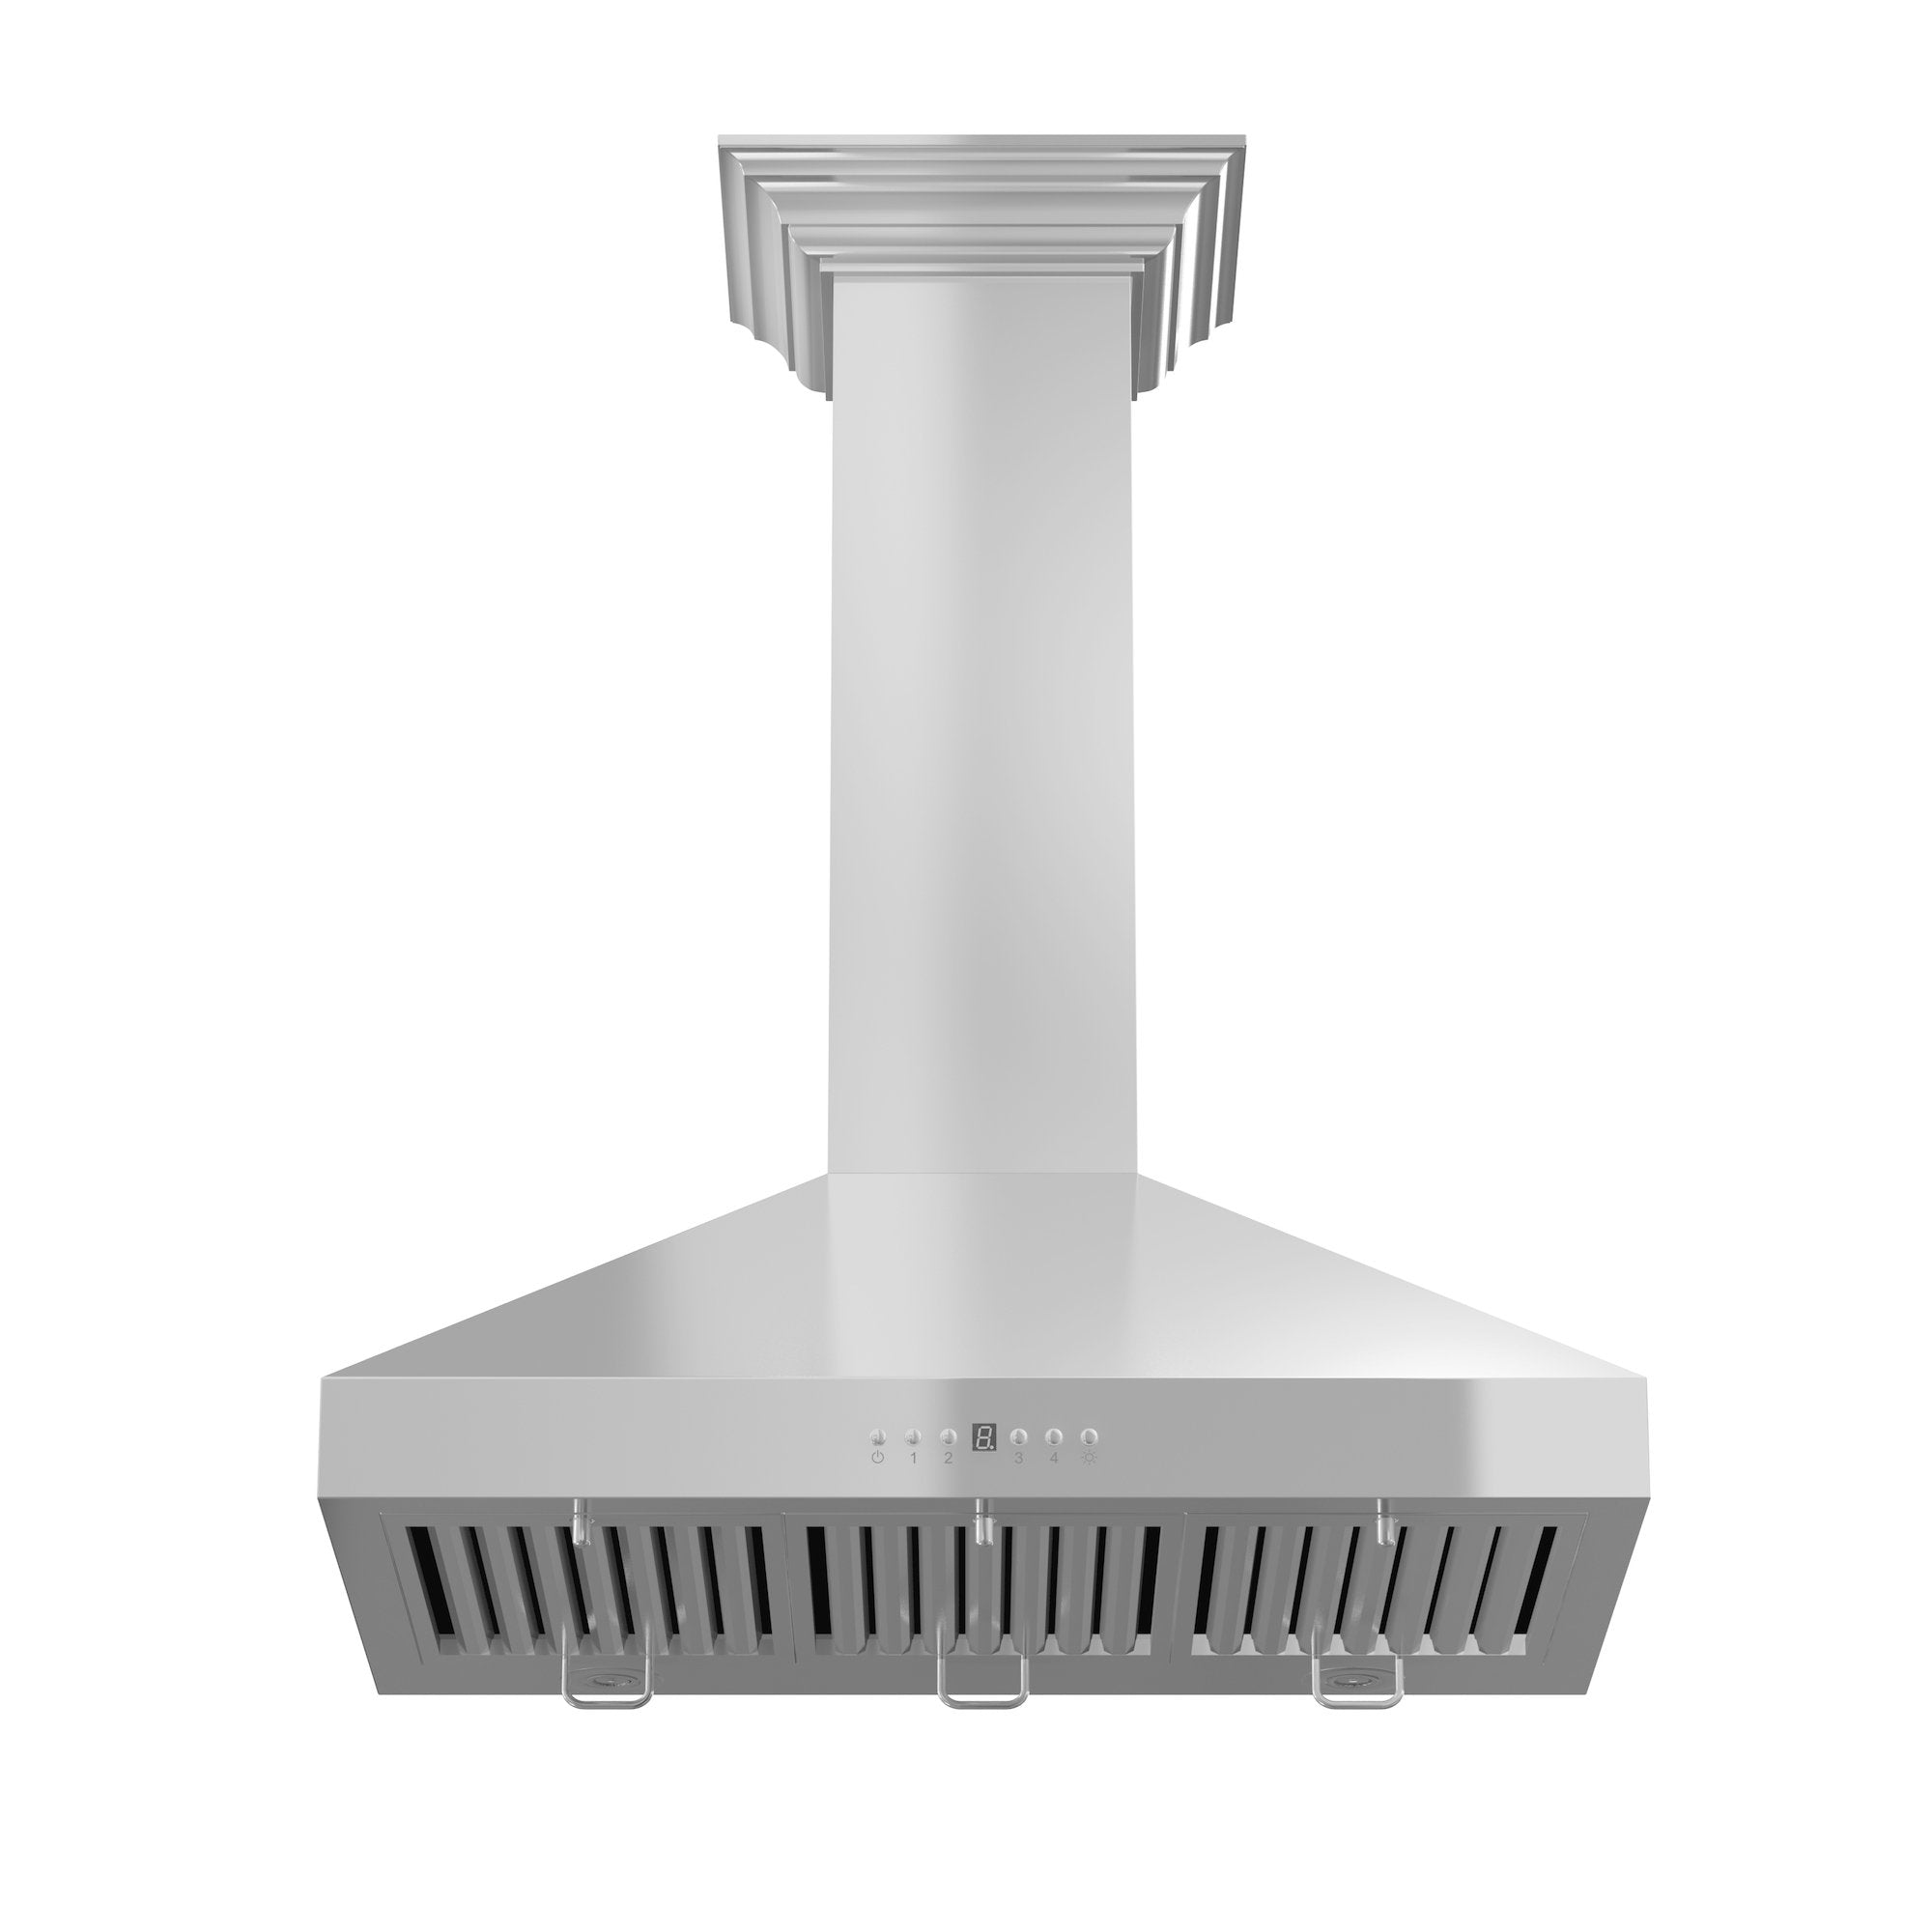 ZLINE  Wall Mount Range Hood in Stainless Steel with Crown Molding (KL3CRN)